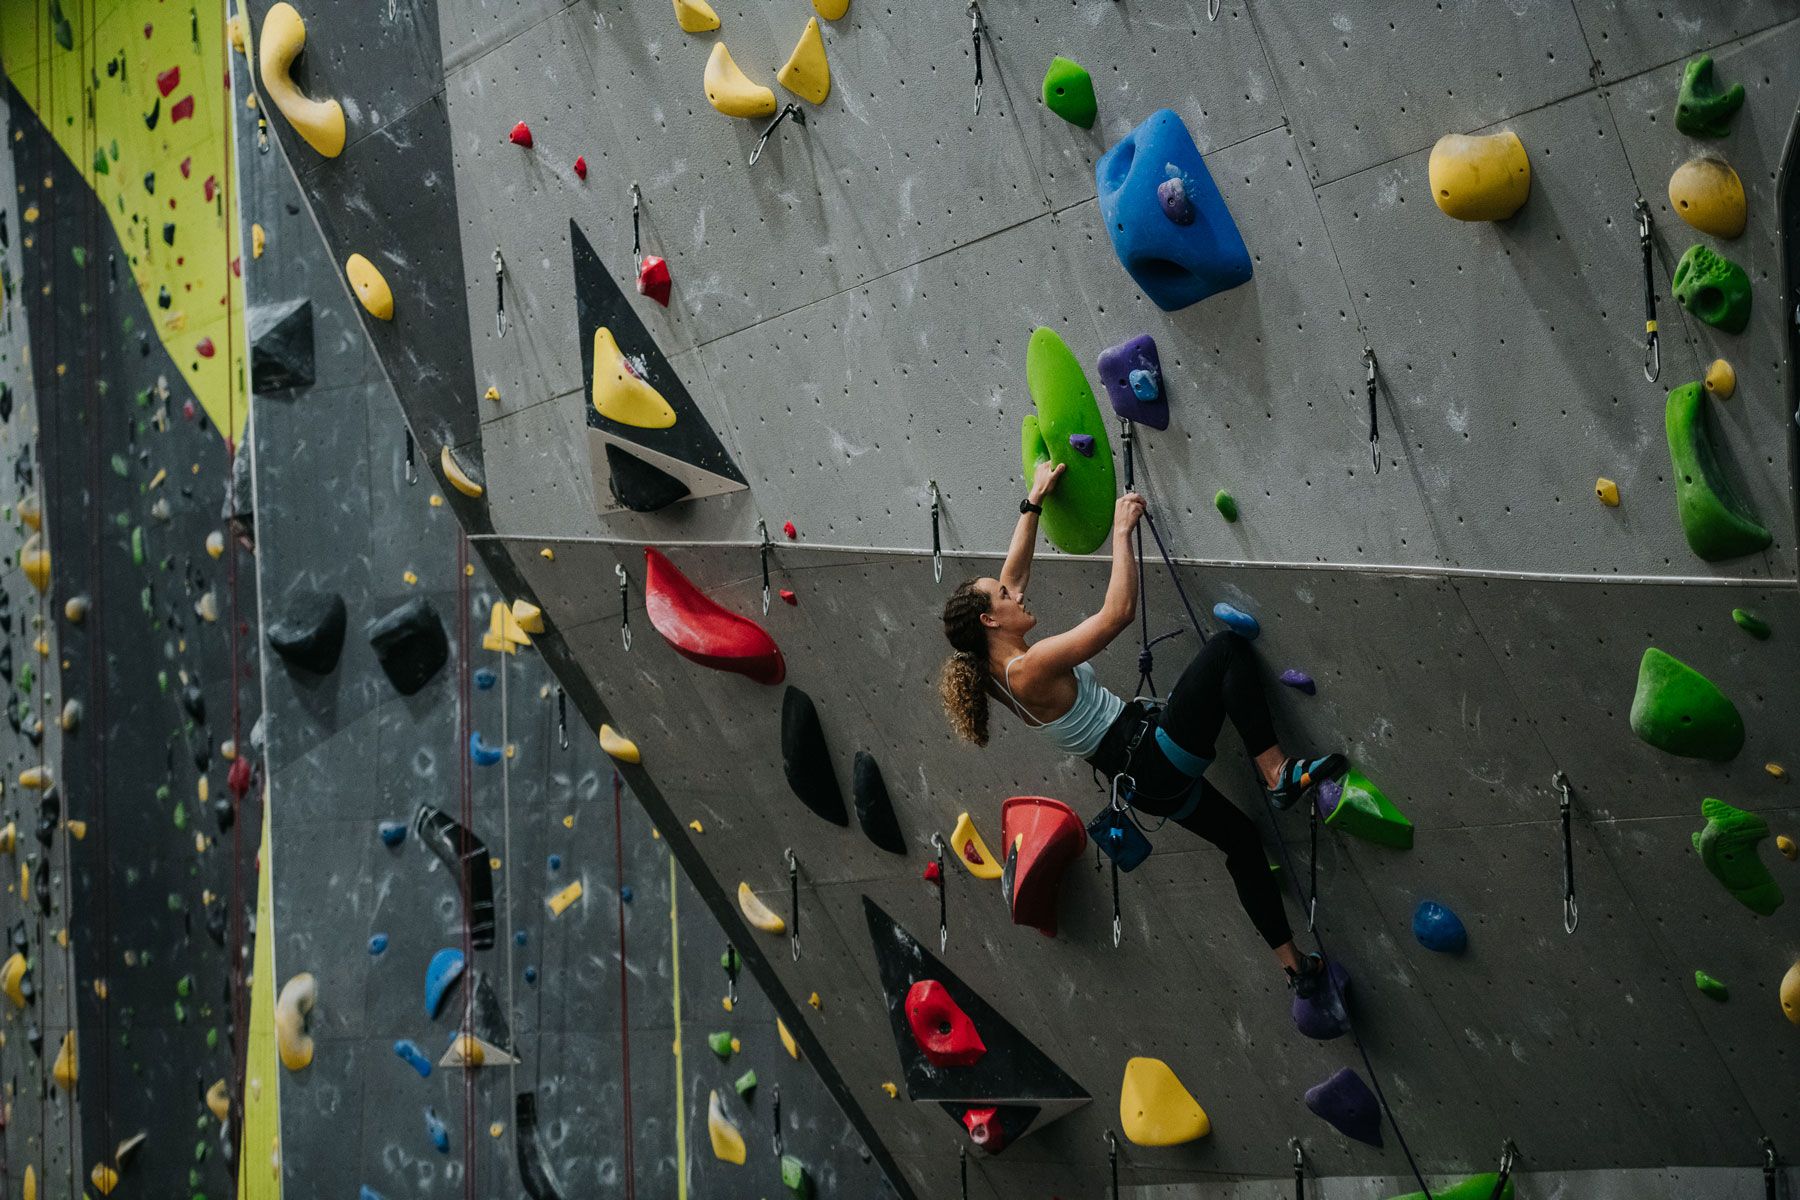 Climbing in the gym, photo by Tara Shupe Photography